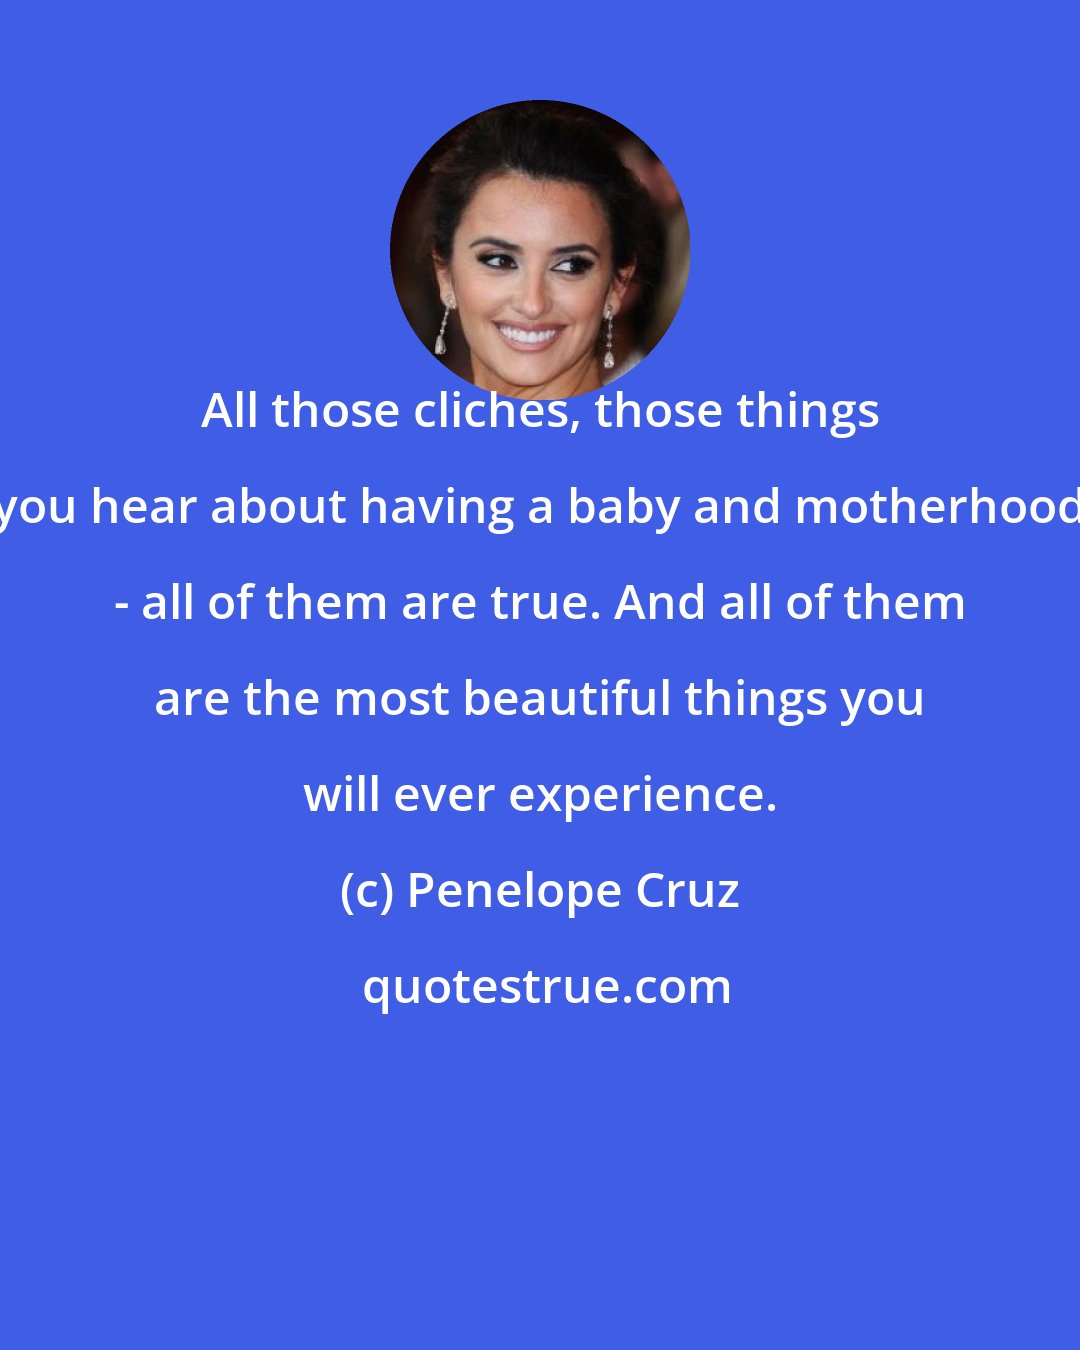 Penelope Cruz: All those cliches, those things you hear about having a baby and motherhood - all of them are true. And all of them are the most beautiful things you will ever experience.